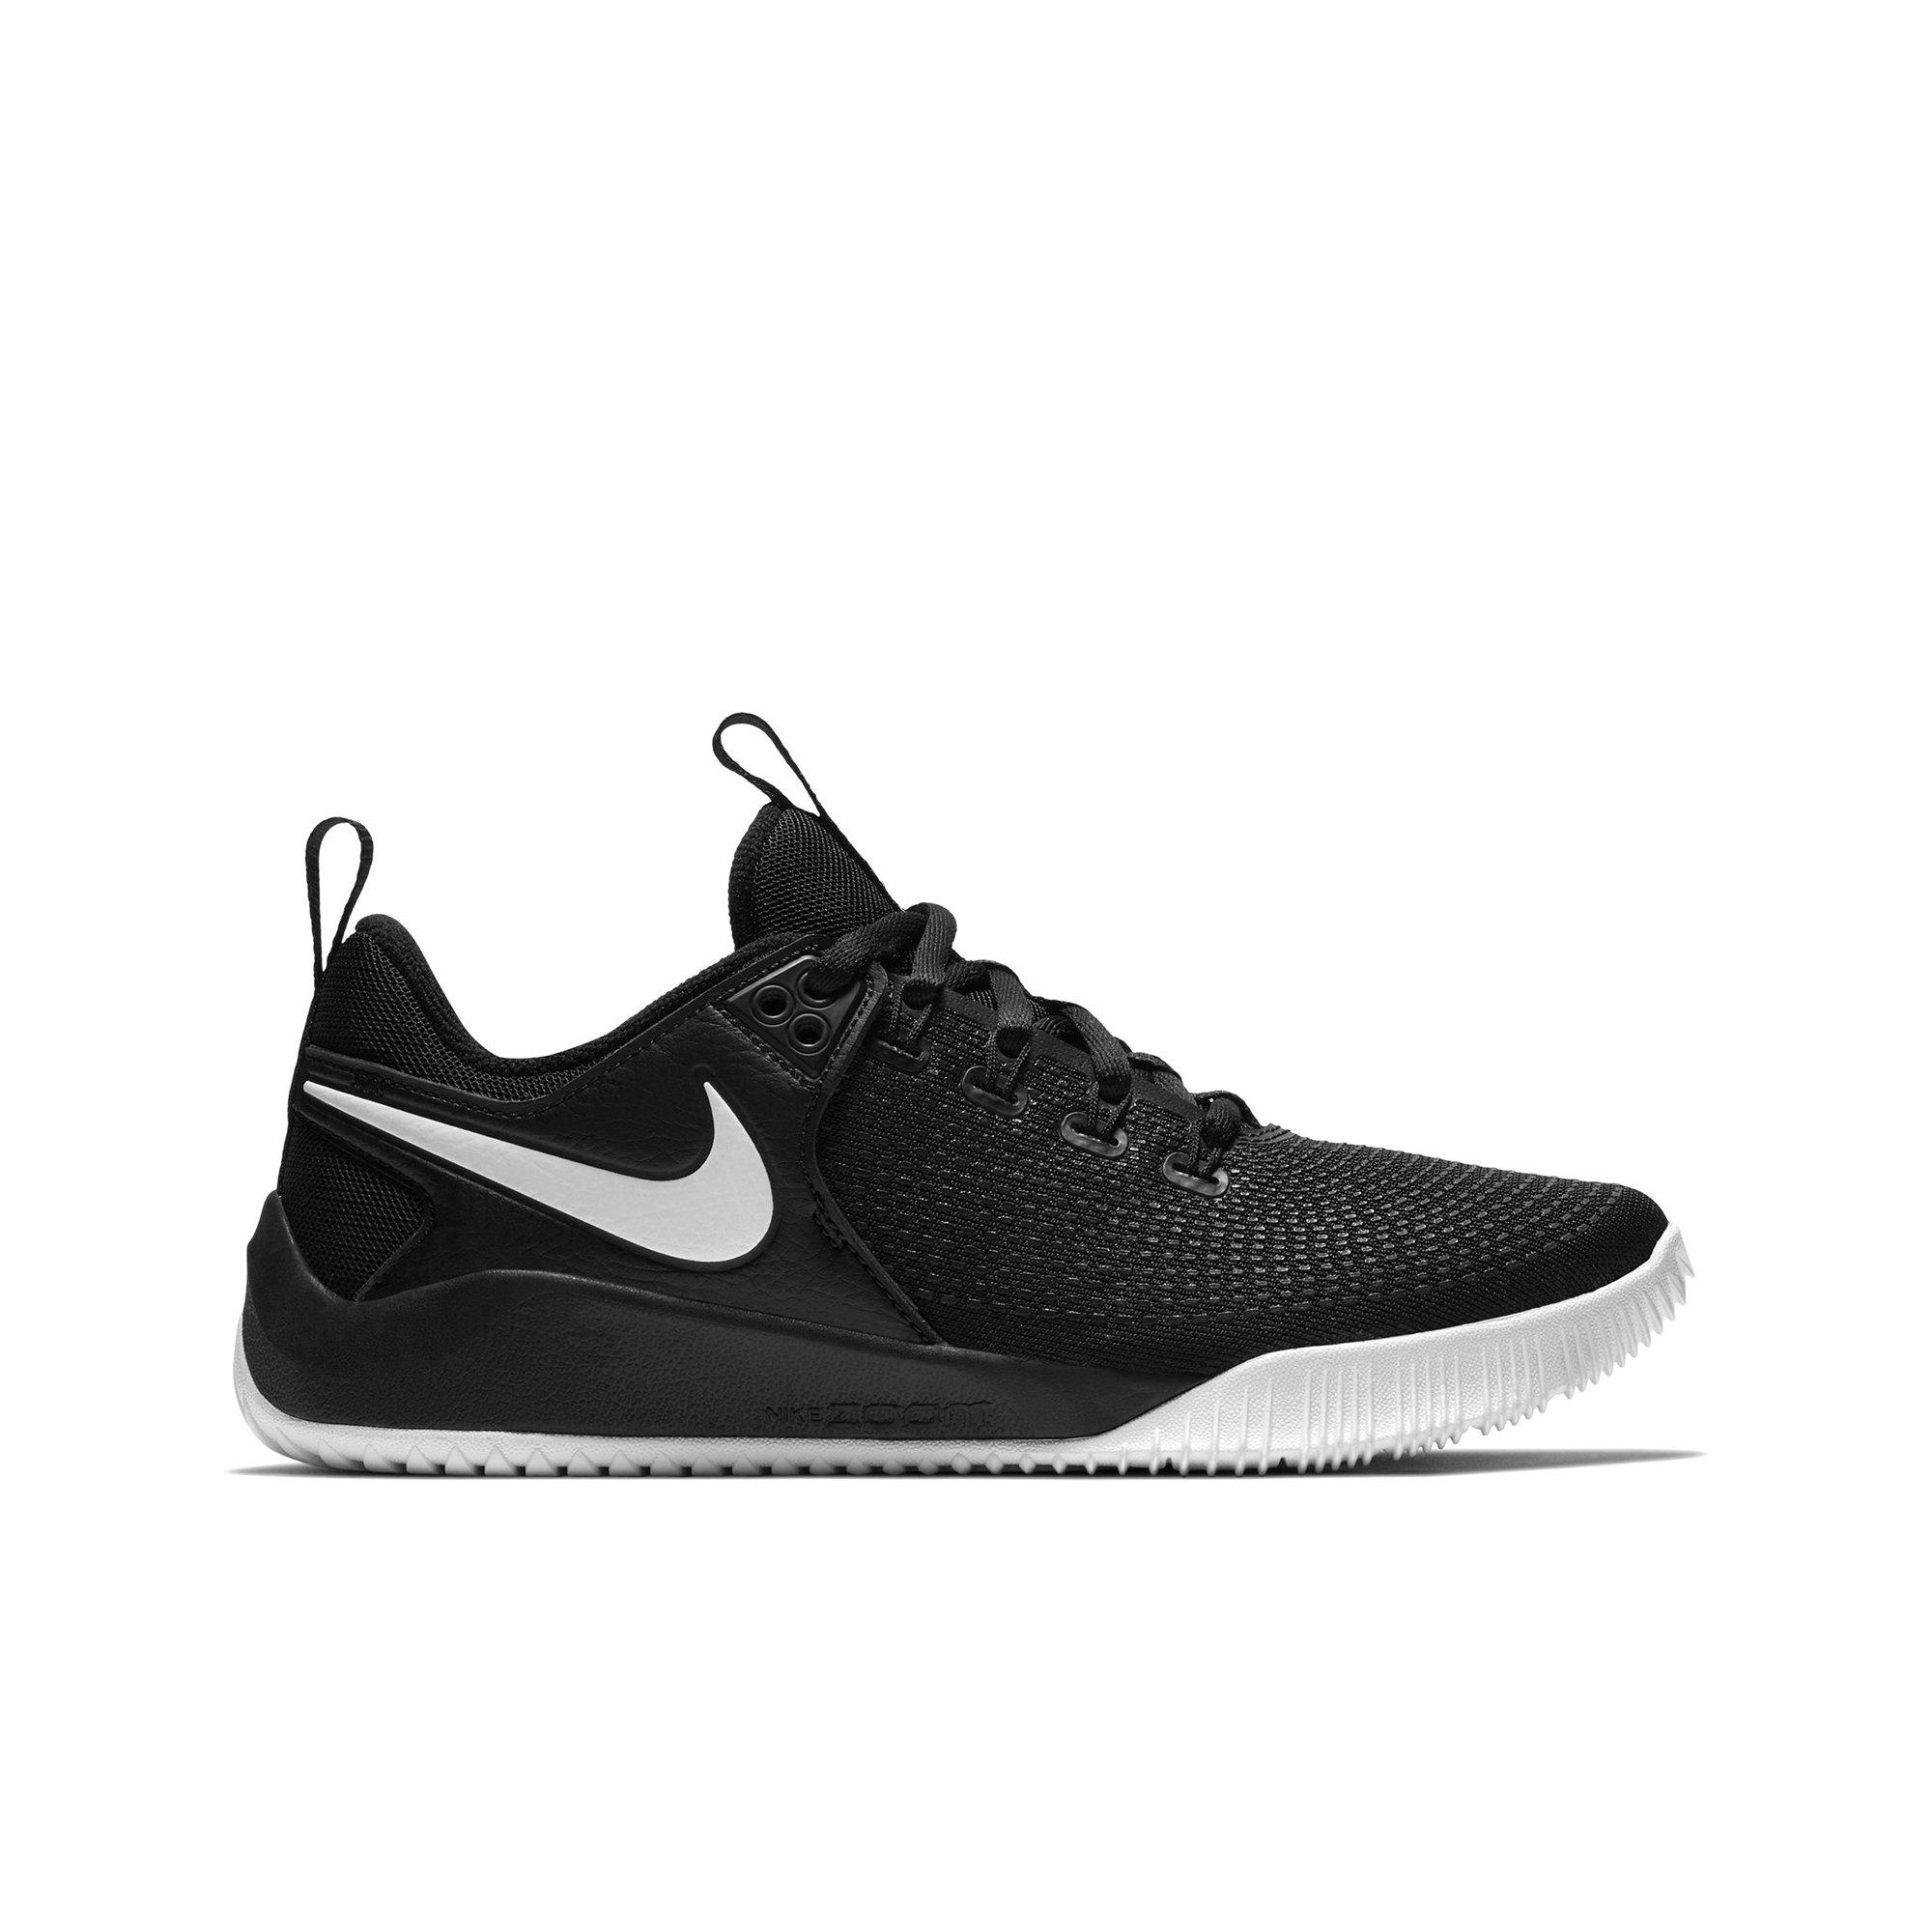 nike volleyball shoes black and white